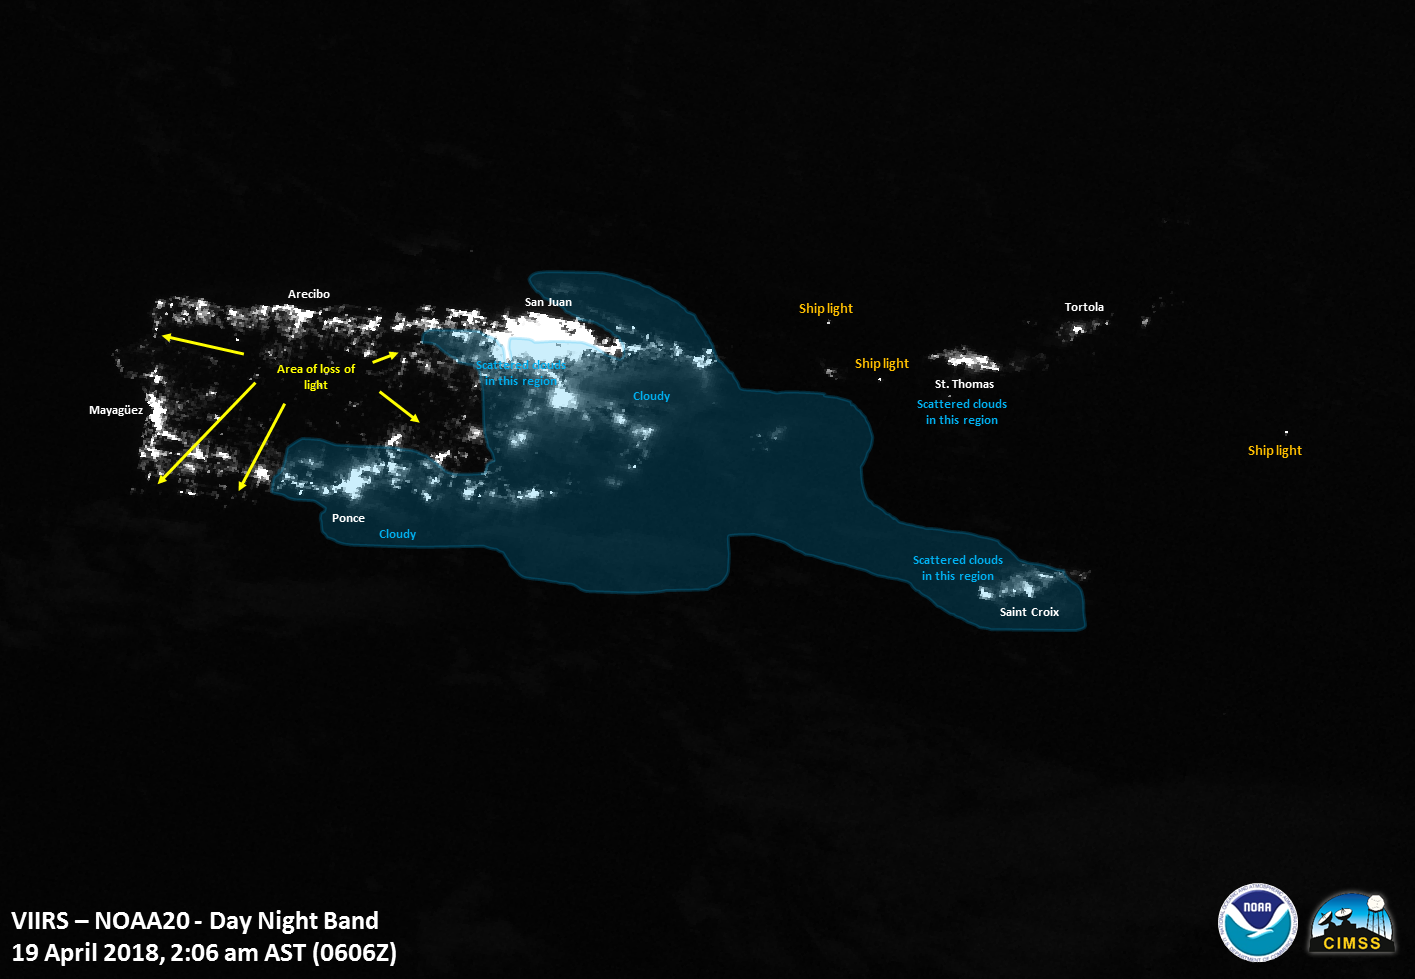 NOAA-20 CAPTURES DAY-NIGHT BAND IMAGES OF MOST RECENT POWER OUTAGE IN PUERTO RICO